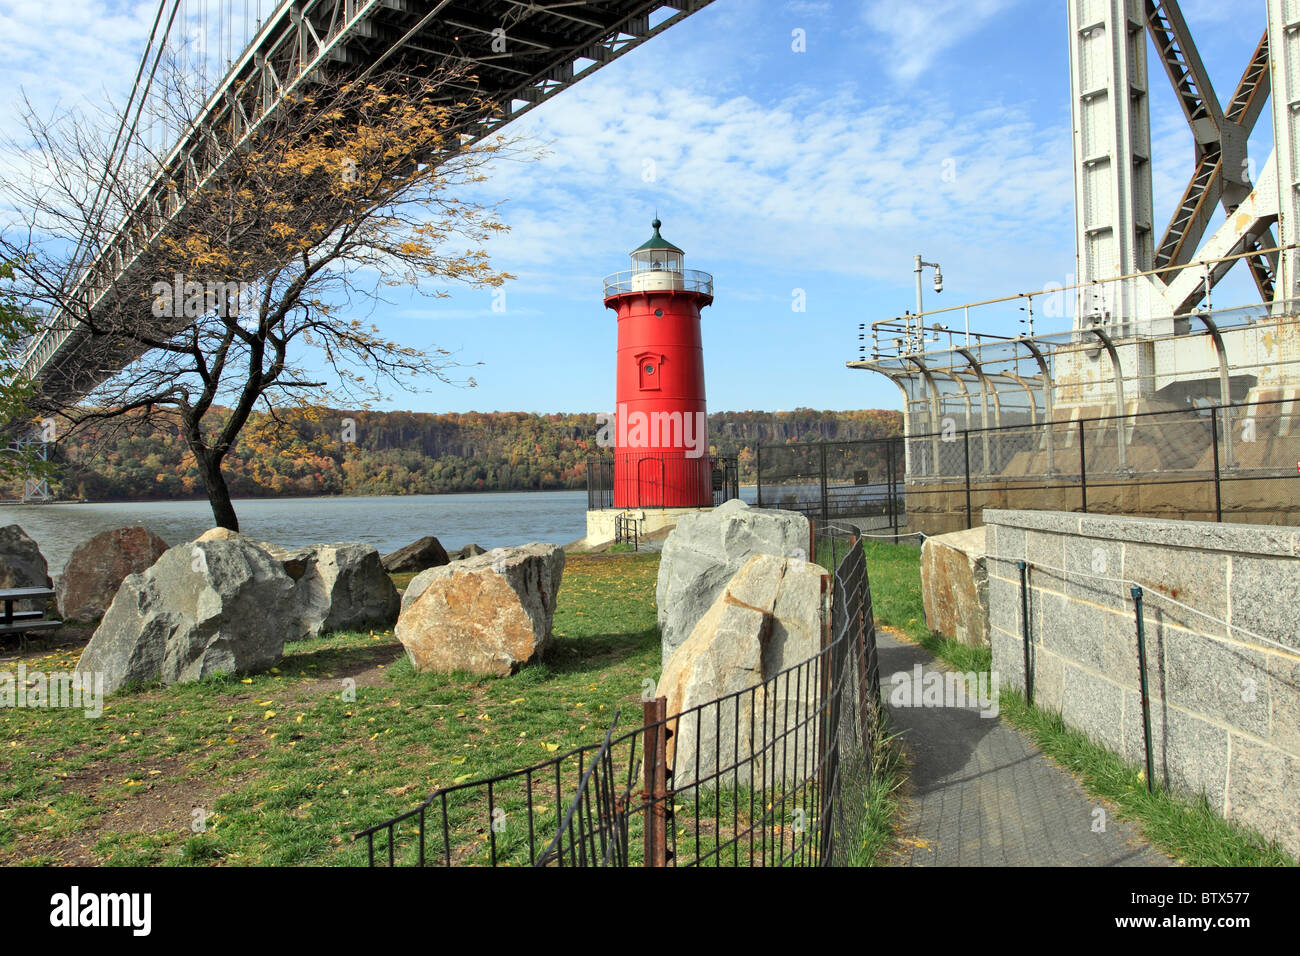 The Little Red Lighthouse on the Hudson River at the base of the New York side of the George Washington Bridge Stock Photo